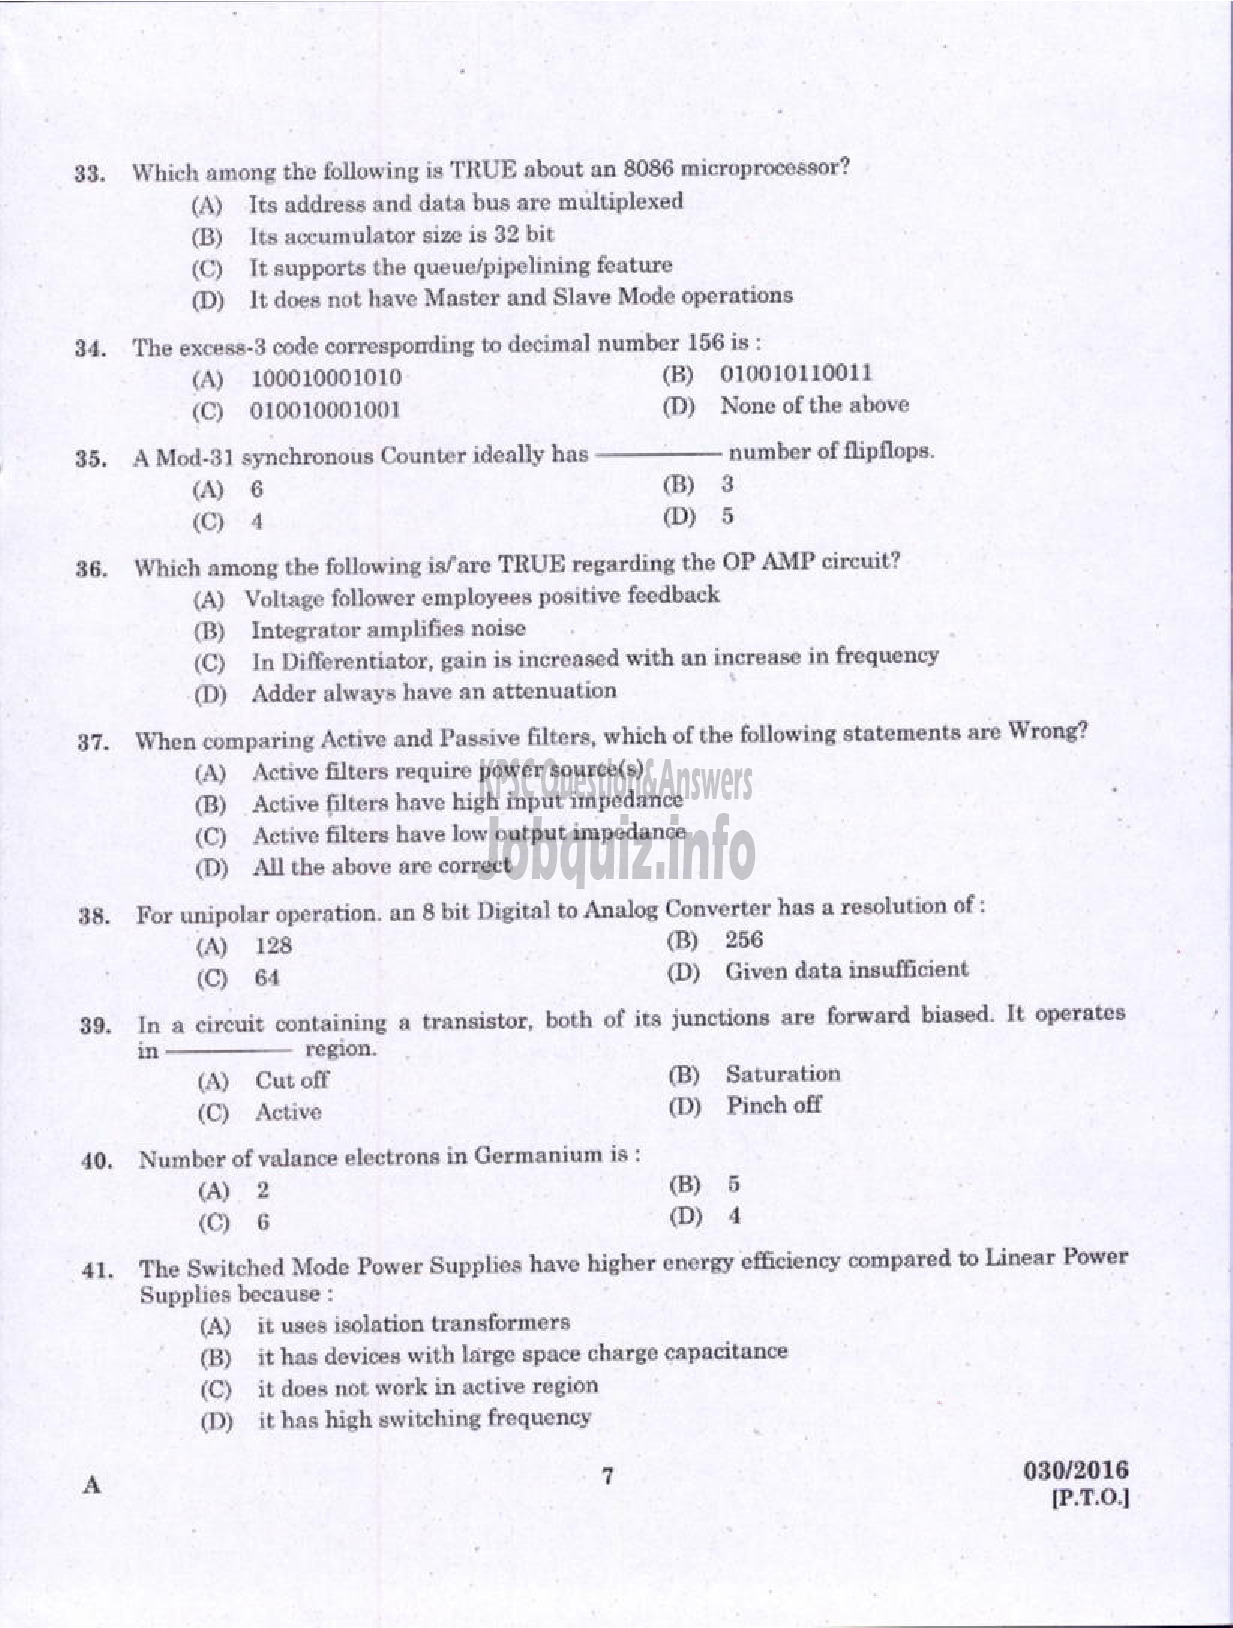 Kerala PSC Question Paper - ASSISTANT ENGINEER ELECTRICAL HARBOUR ENGINEERING-5